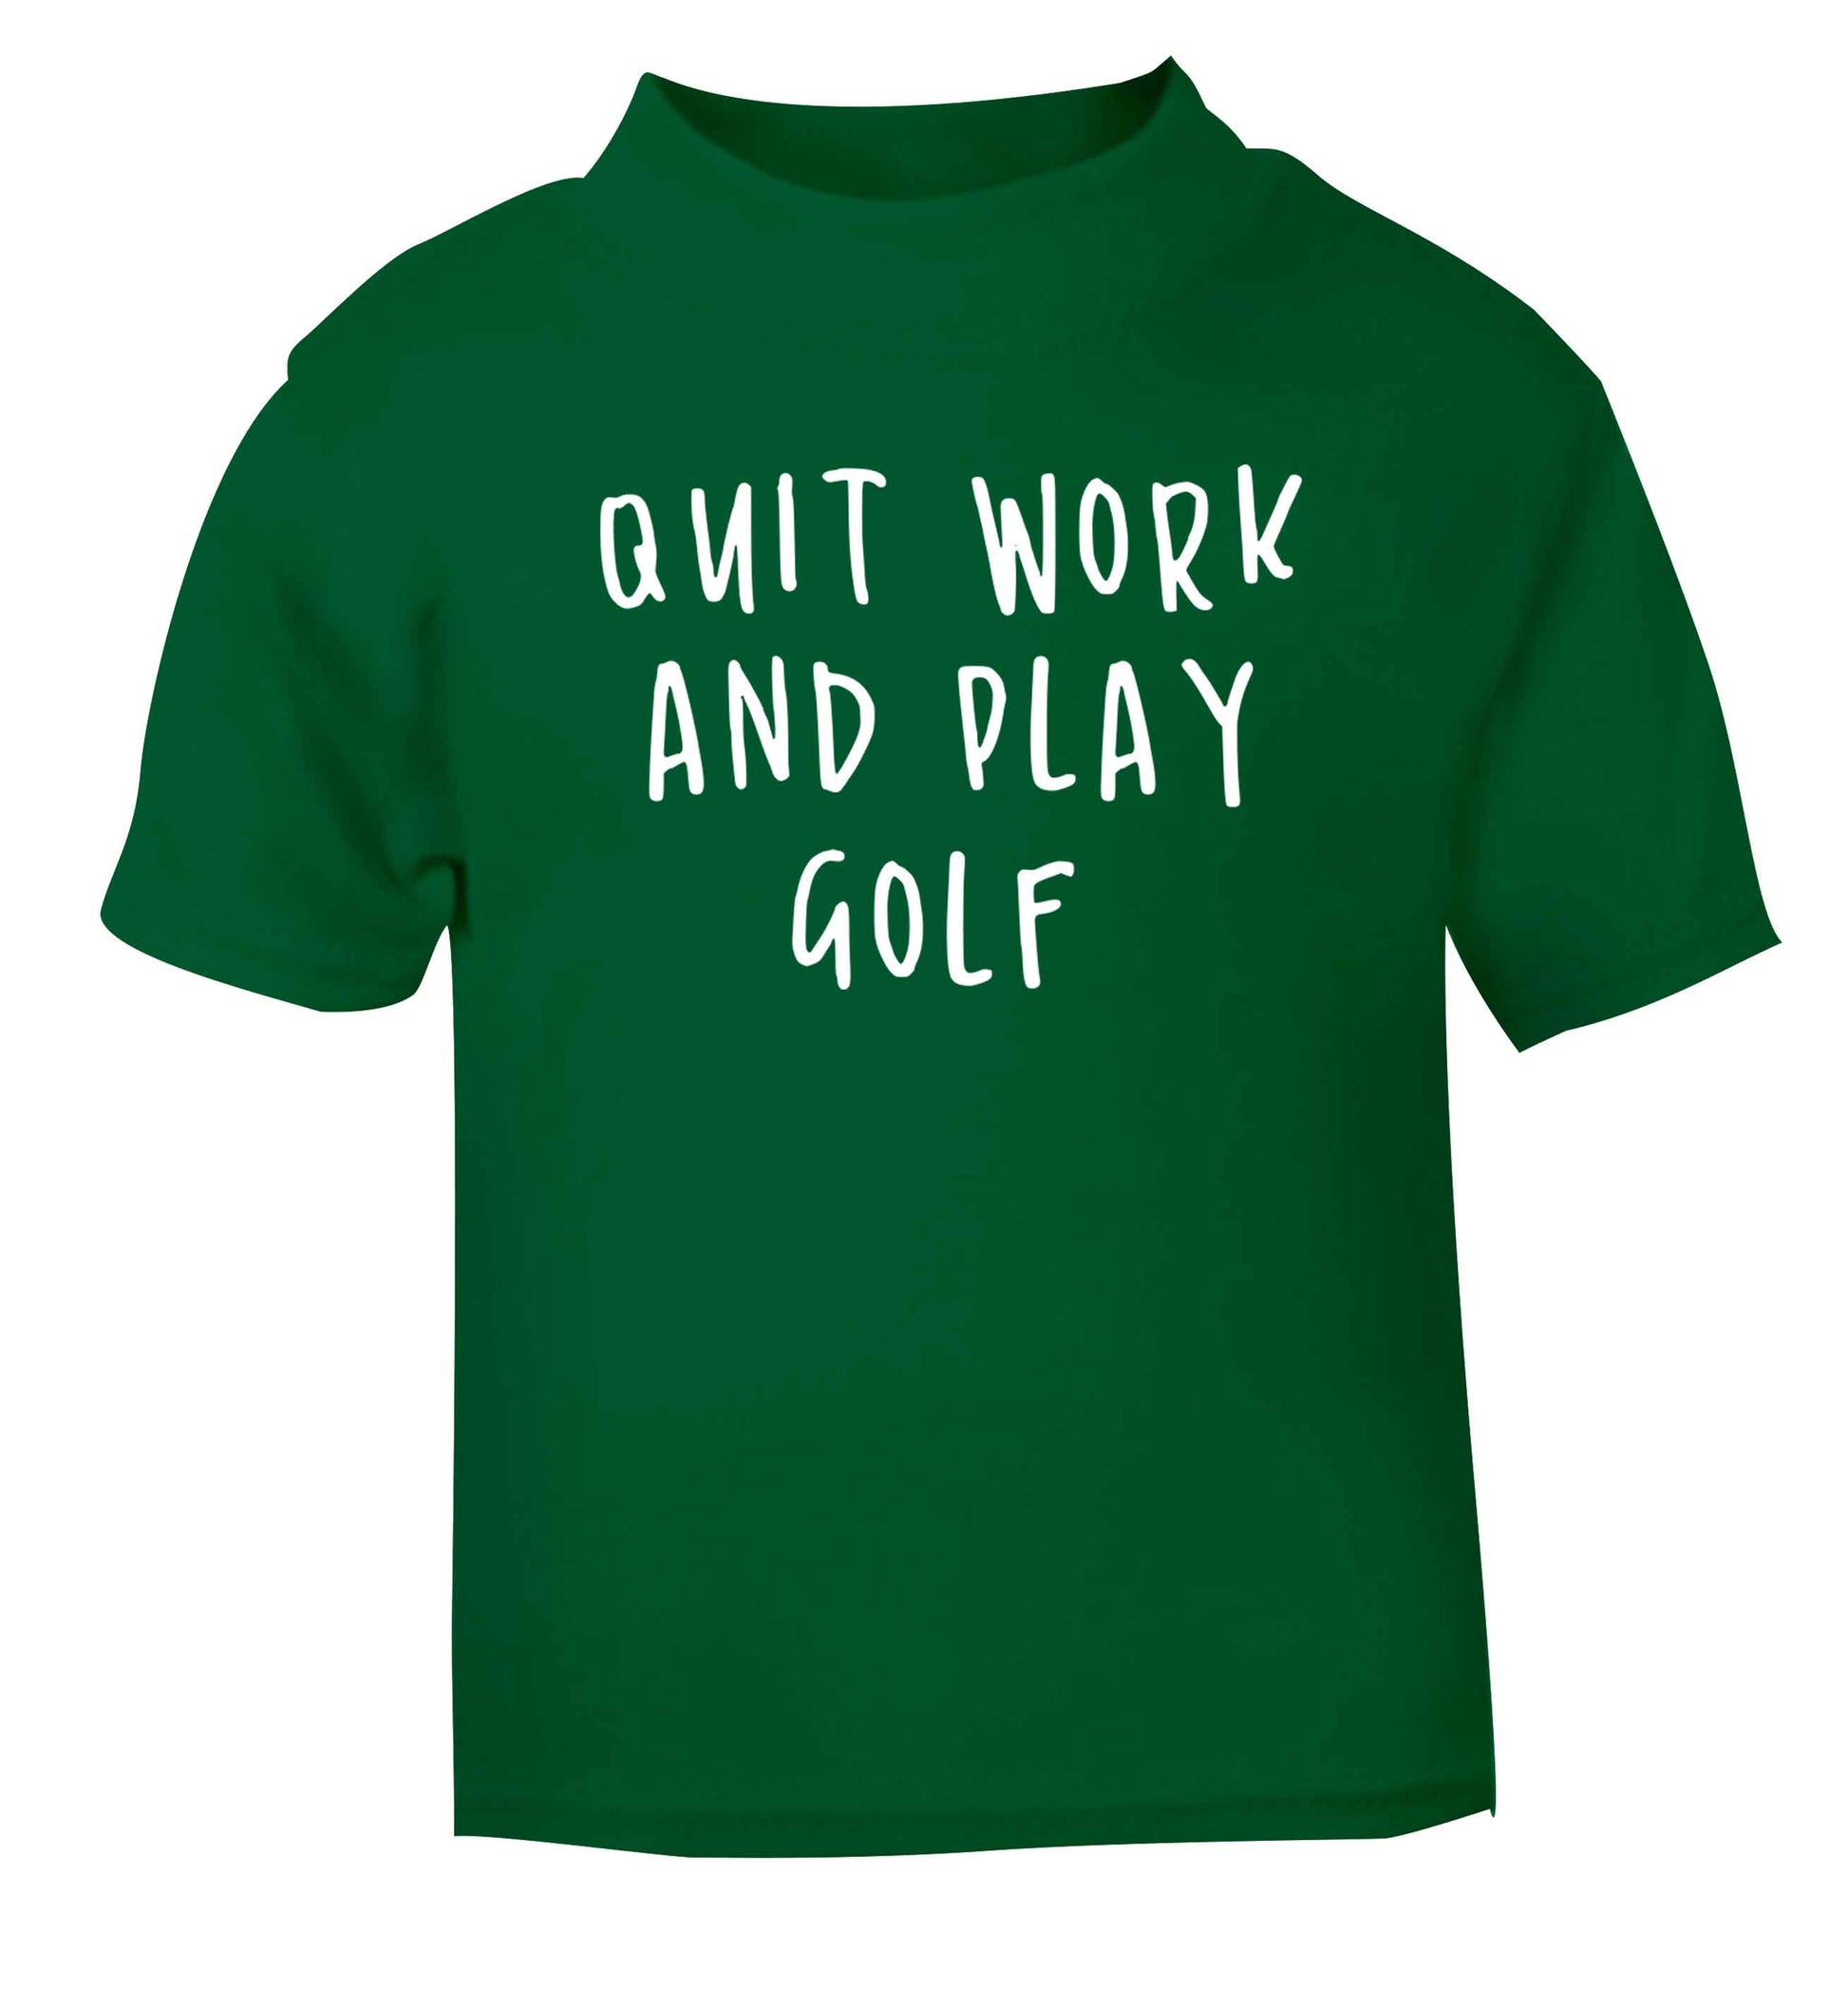 Quit work and play golf green Baby Toddler Tshirt 2 Years